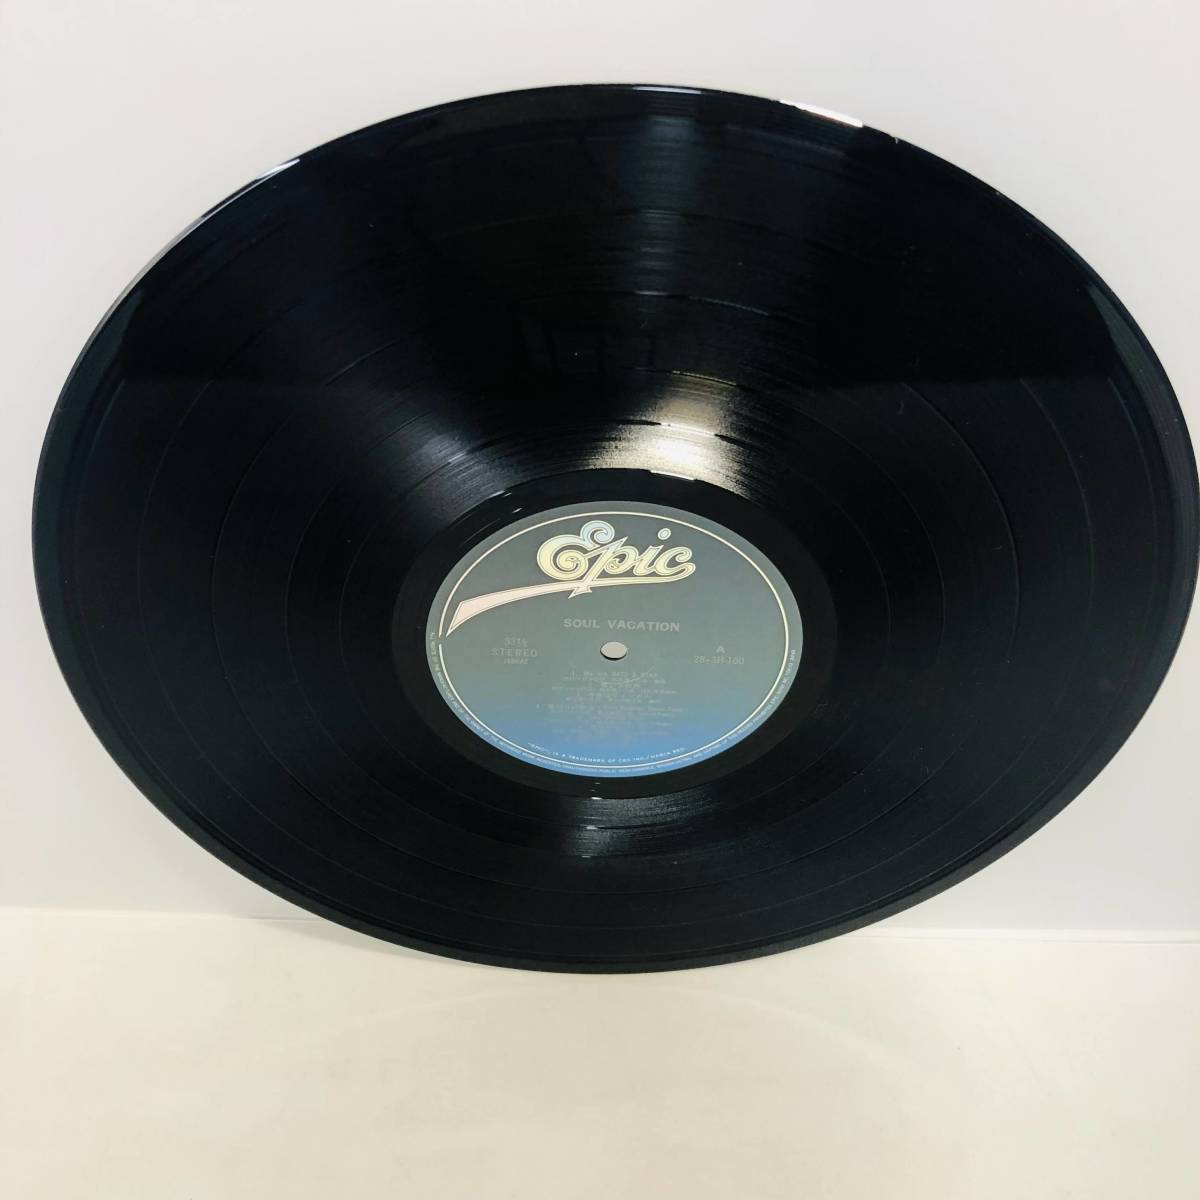 [LP] record reproduction not yet verification rats & Star ( Suzuki Masayuki ) Soul Vacation 28-3H-100* Ootaki Eiichi produce * bulk buying warm welcome! including in a package possibility 